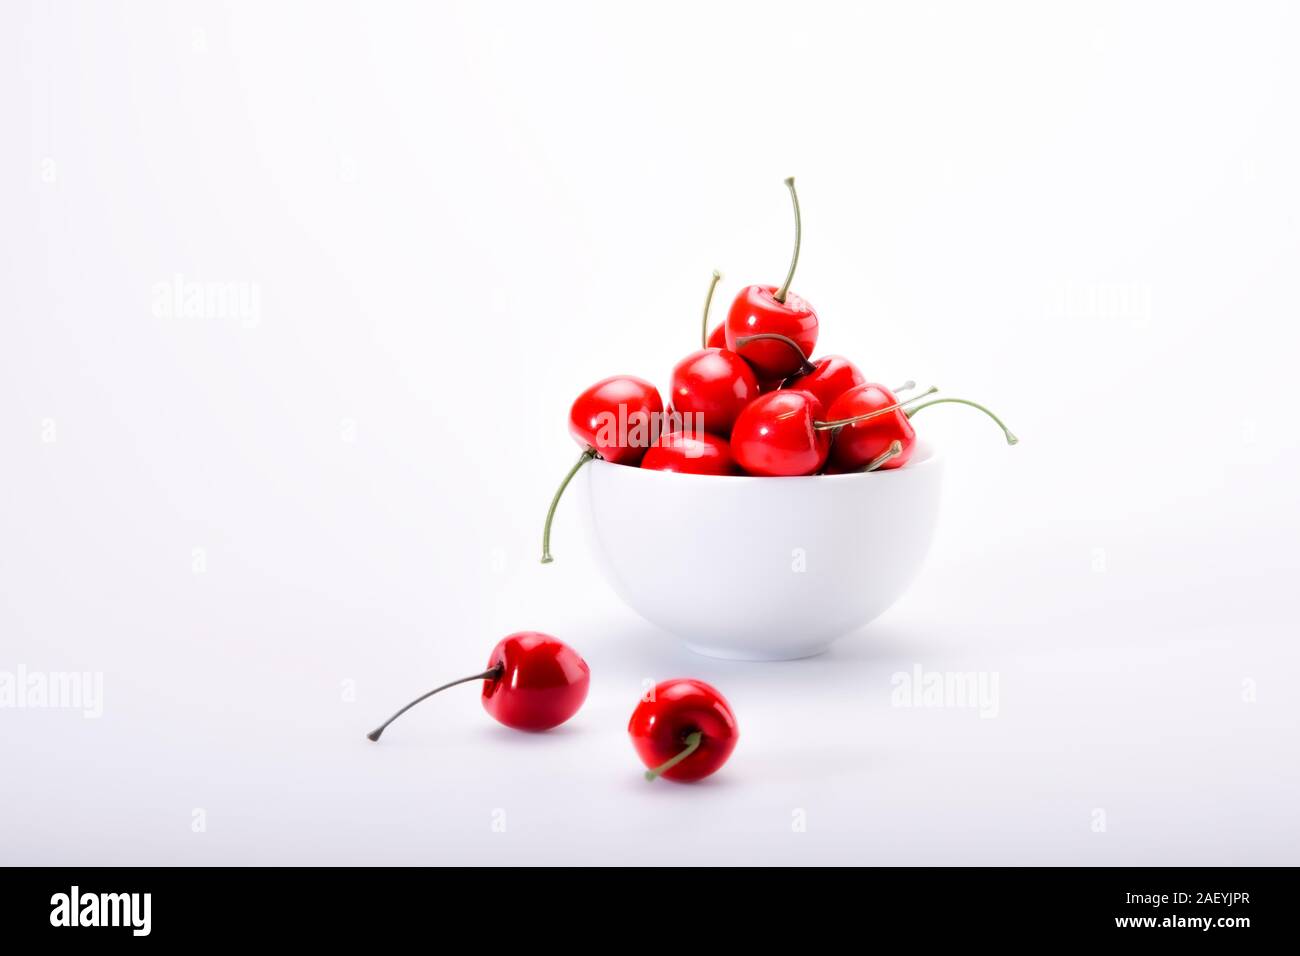 Life's a bowl of cherries. High key photograph on an infinity table shot in the studio using Profoto lighting. Stock Photo